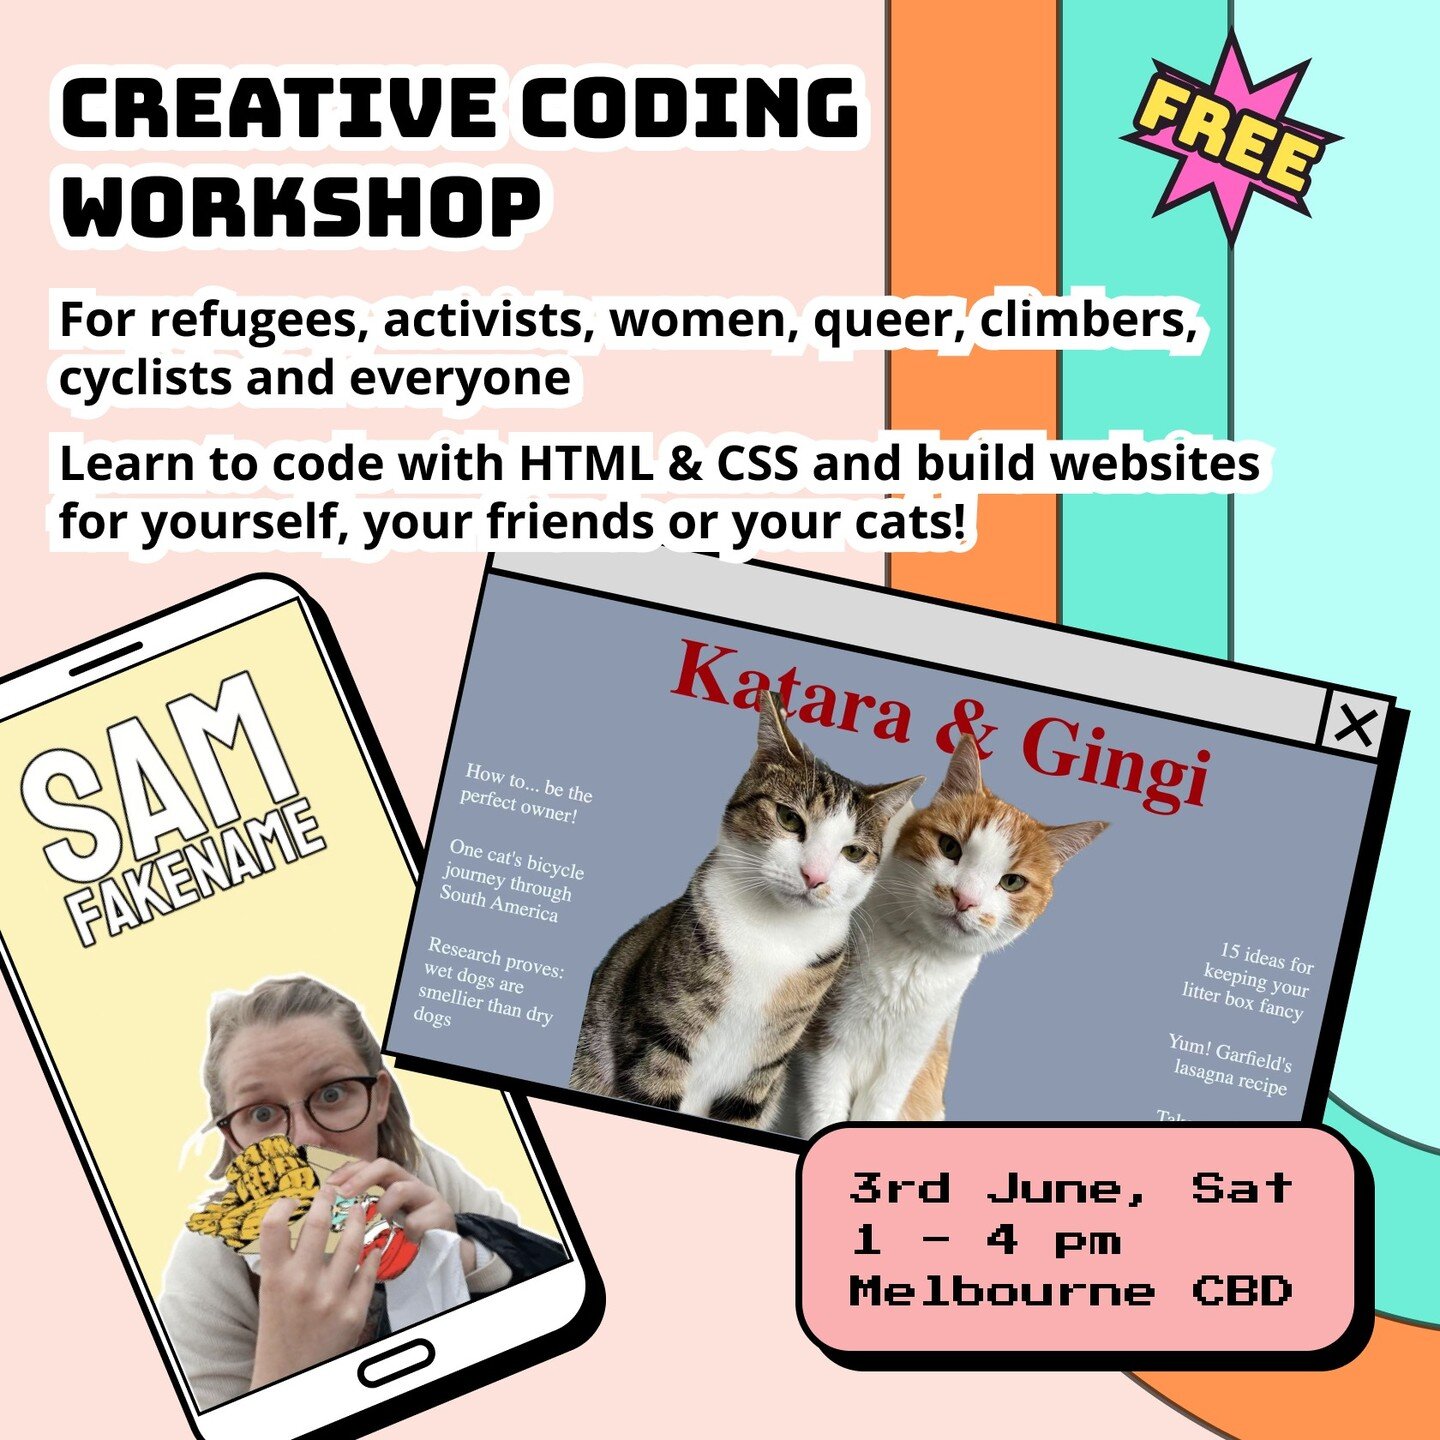 Come join our beginner-friendly free coding workshop (also expert-friendly, if you already know some coding, we will show you more fun stuff), meet some friendly people while making some cool projects.